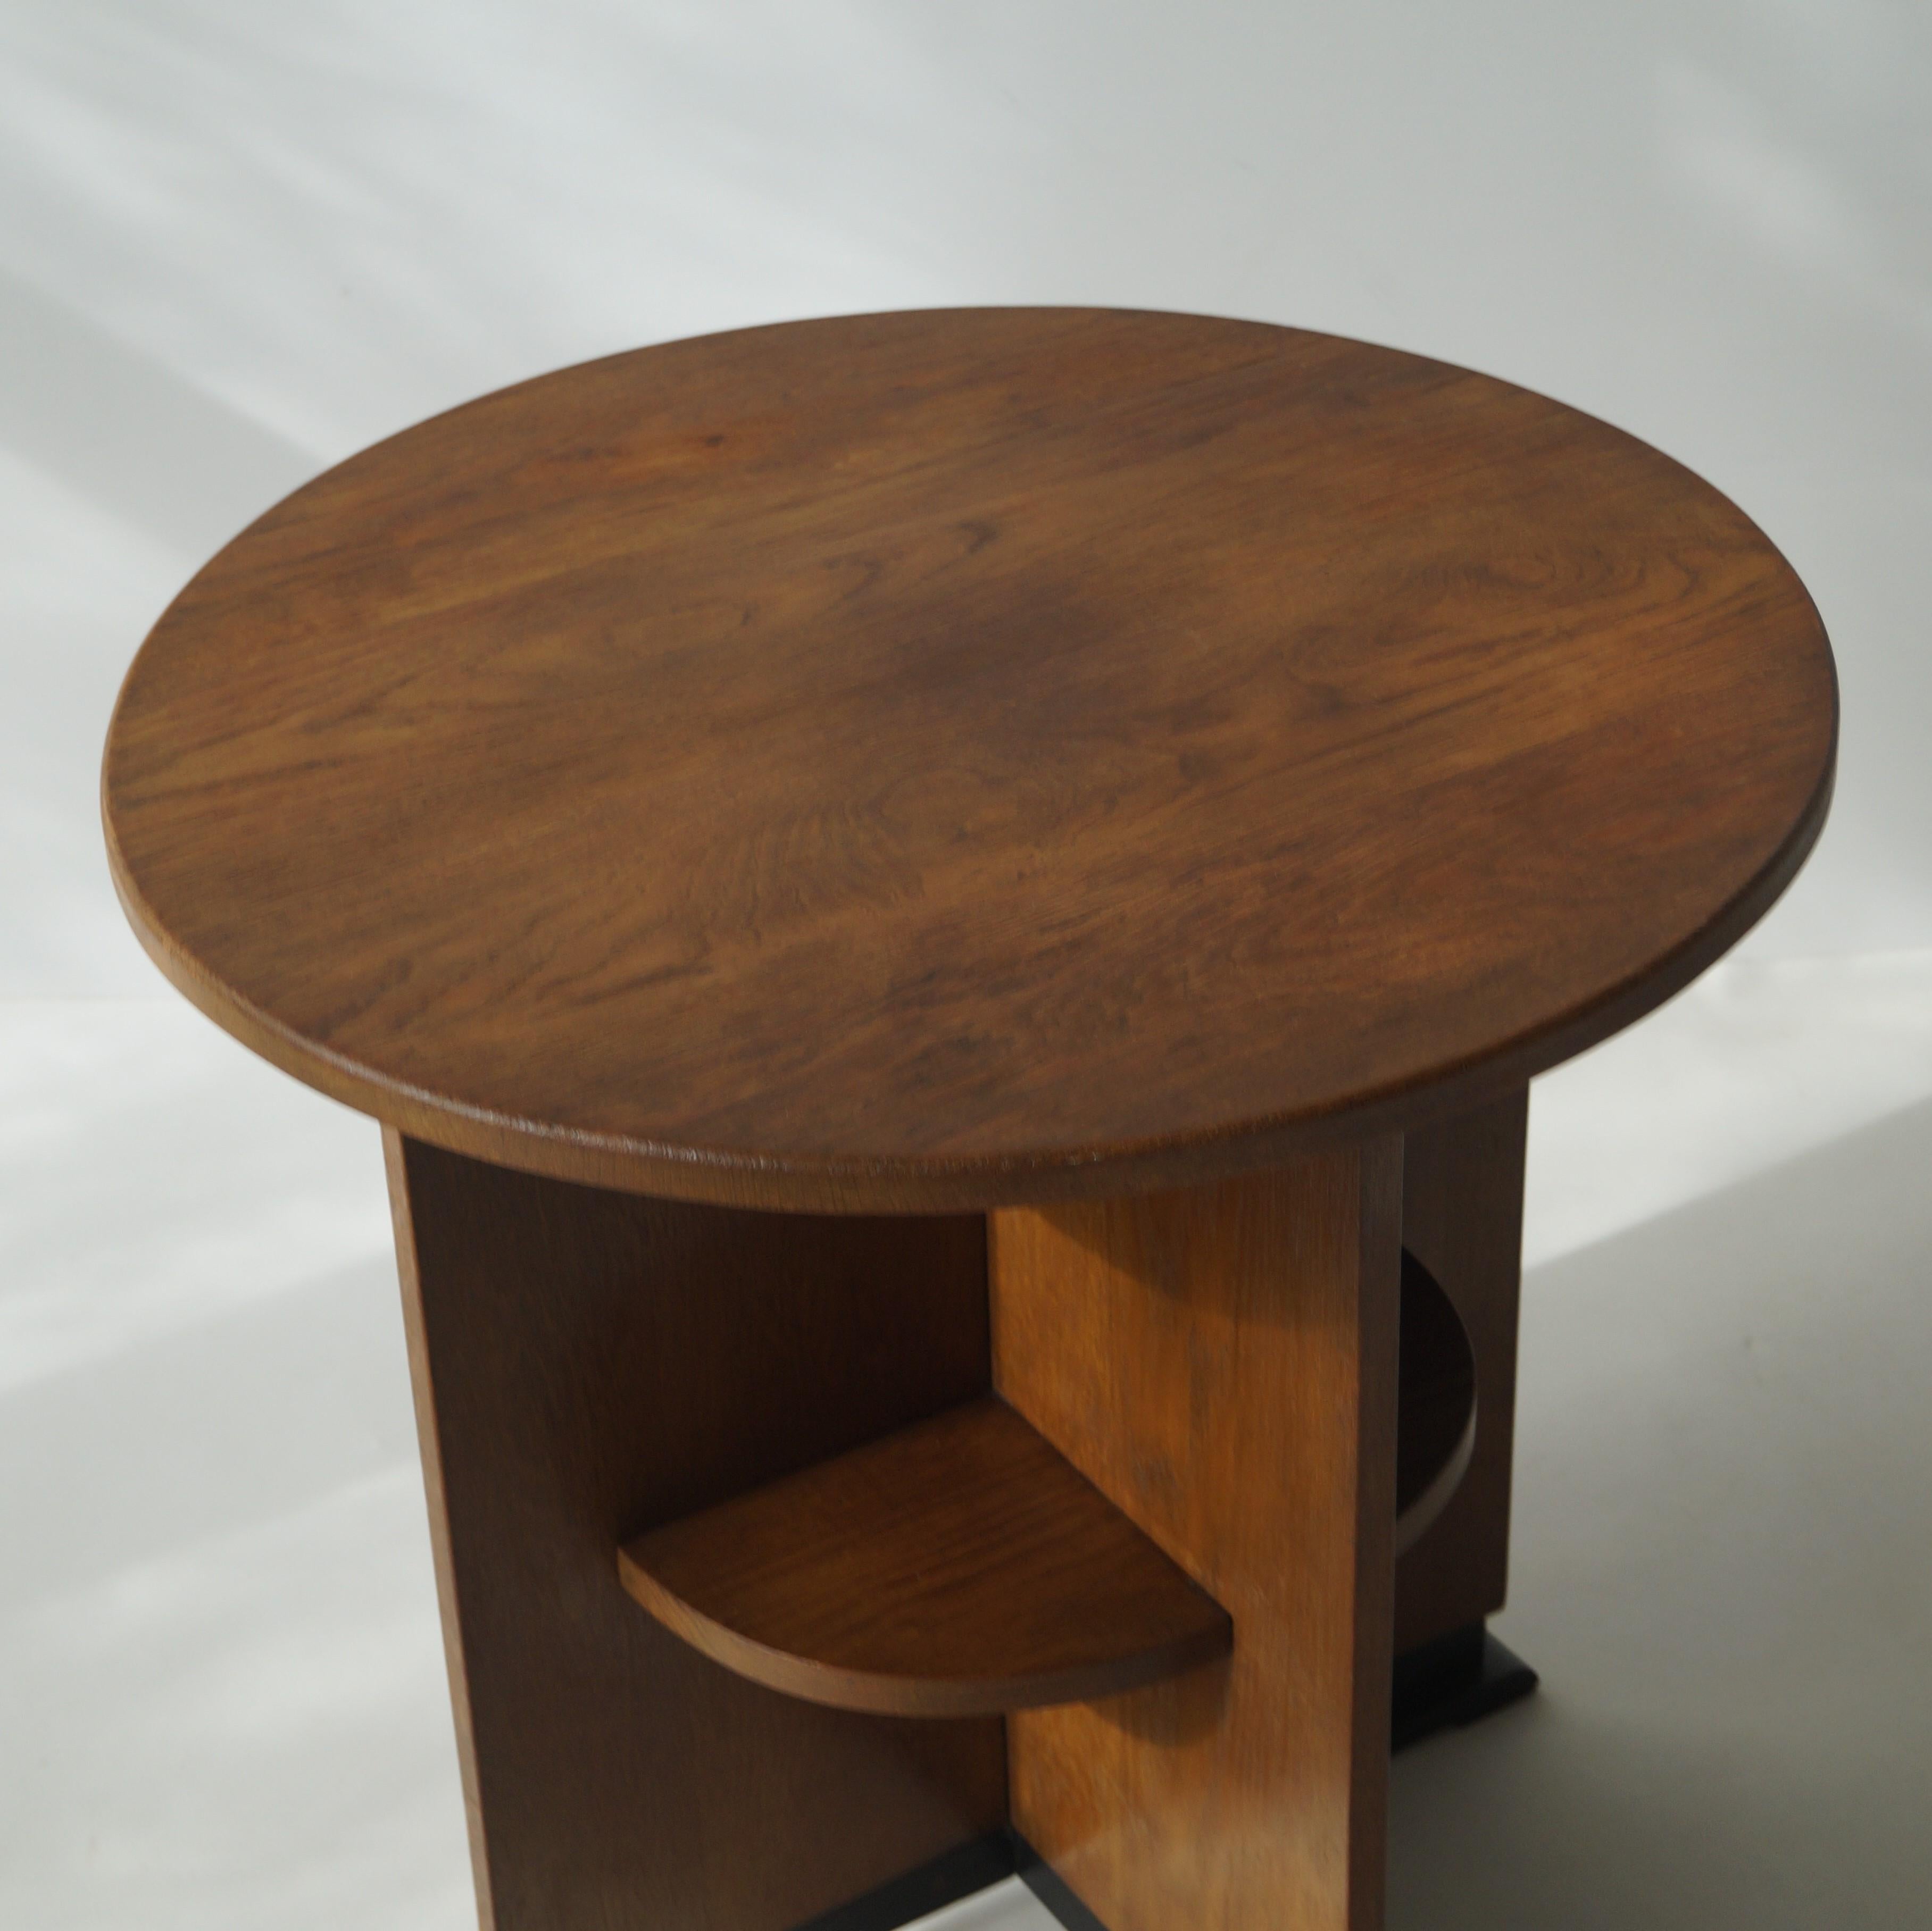 Dutch Art Deco (Haagse School) Occasional Table with Modernist Lines, 1920s 3